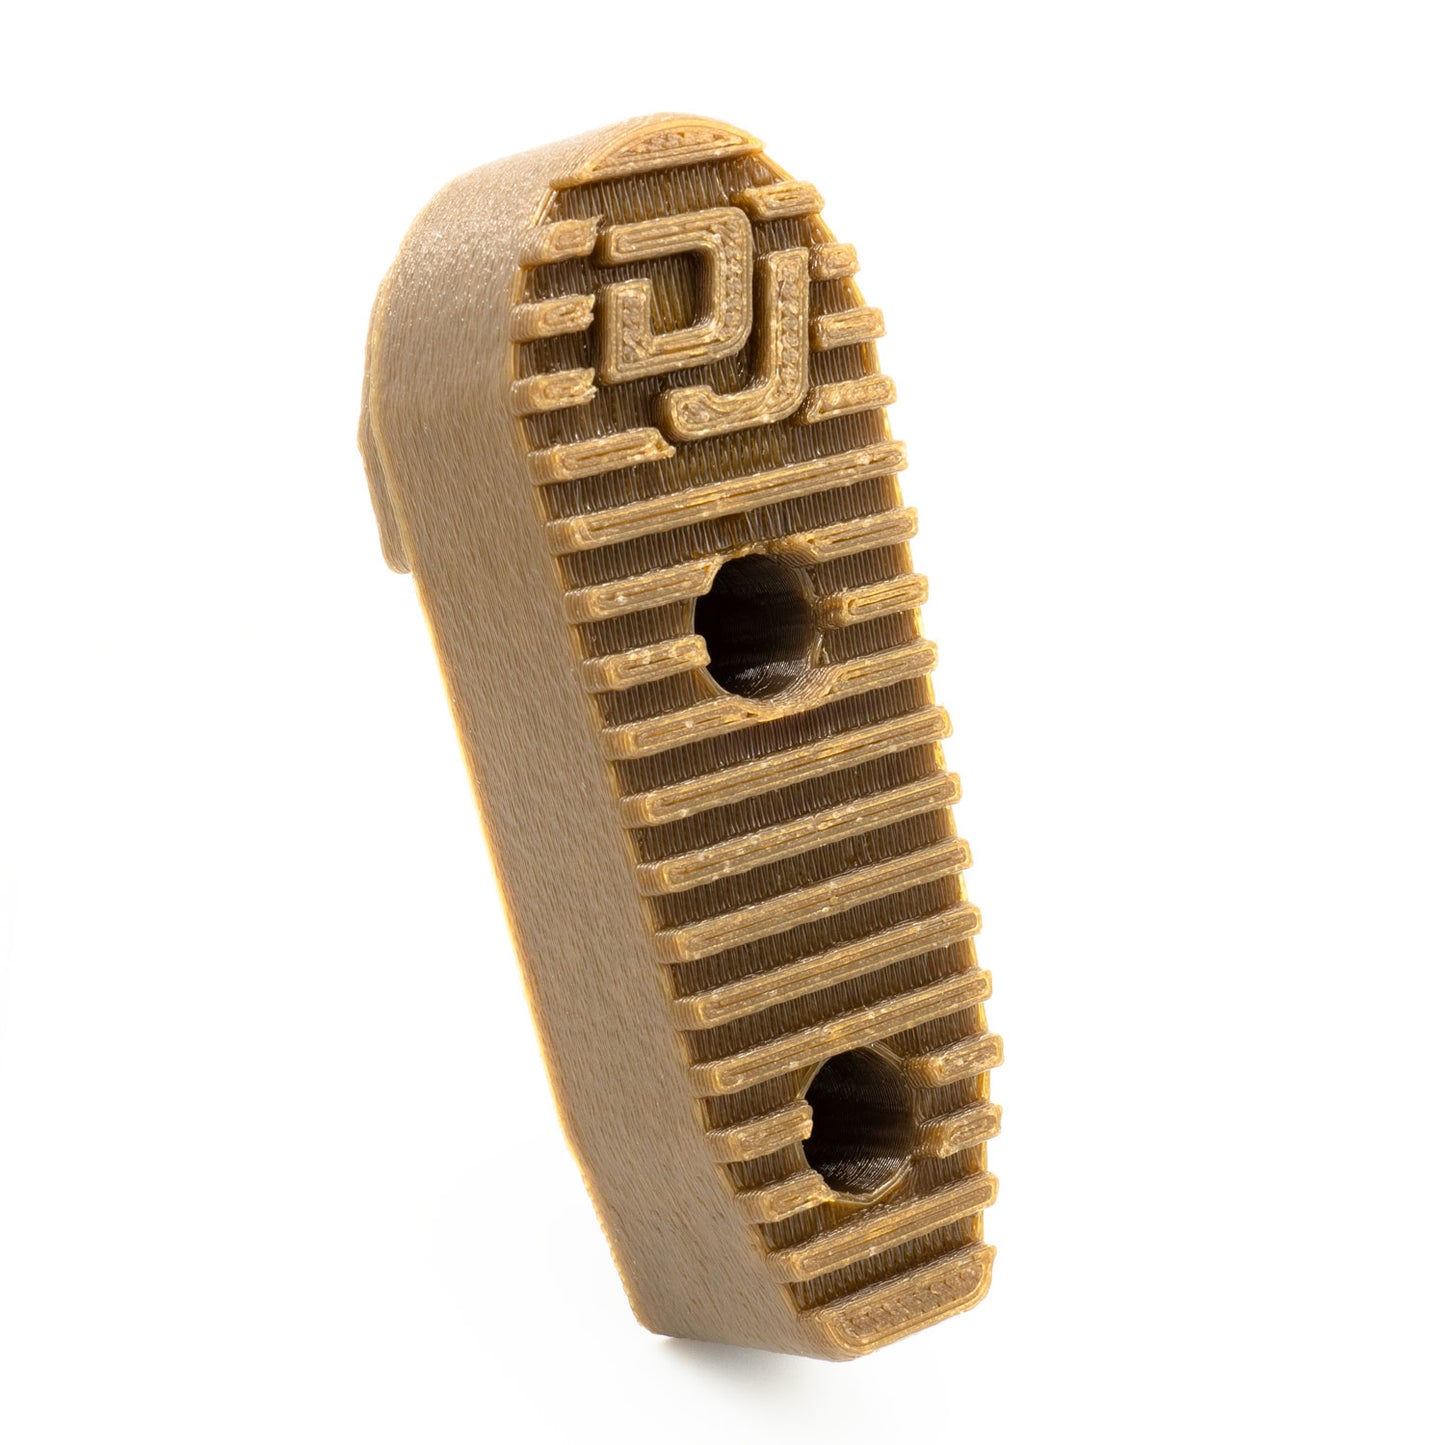 Recoil pad for Magpul SL-M/K Stock